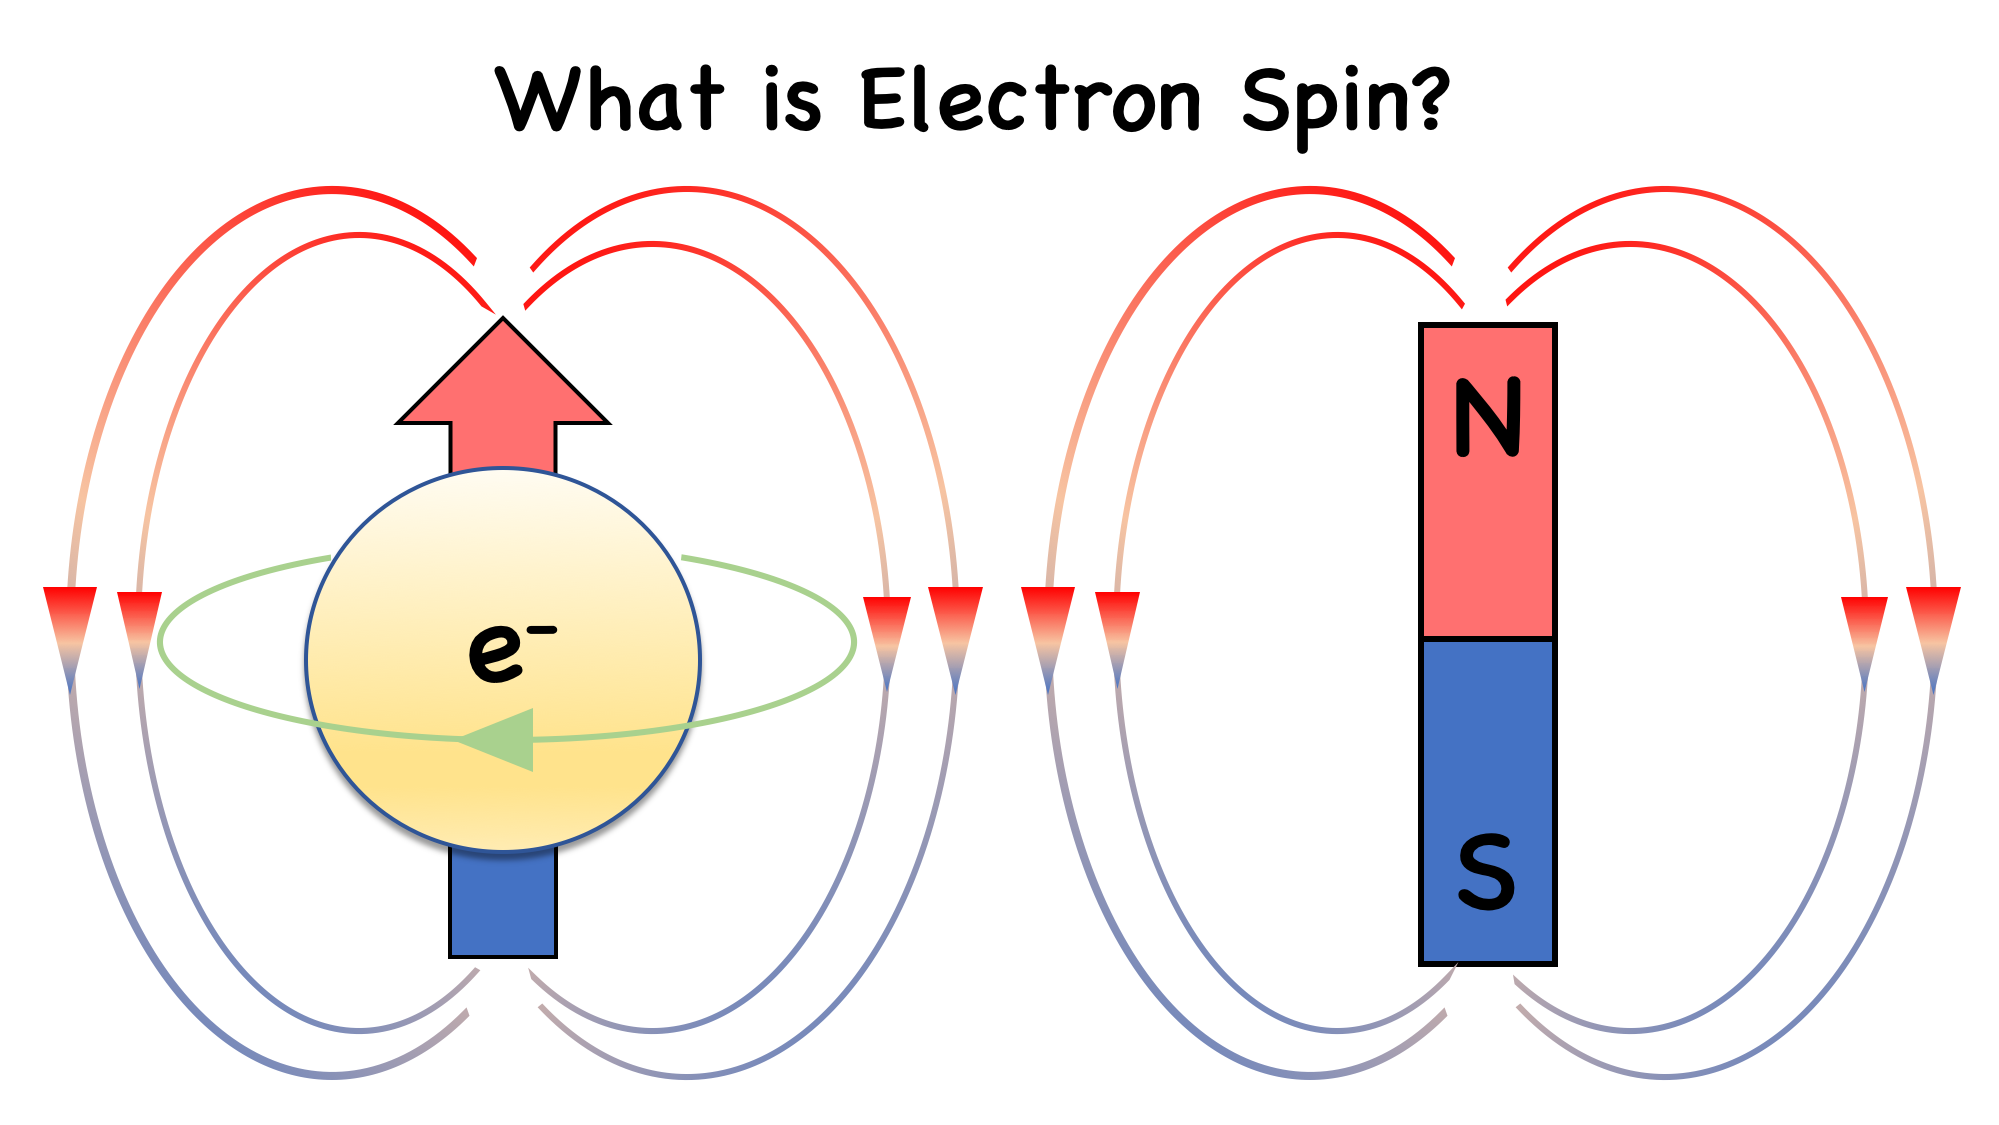 An electron's spin creates a magnetic moment, so it behaves like a tiny magnet.